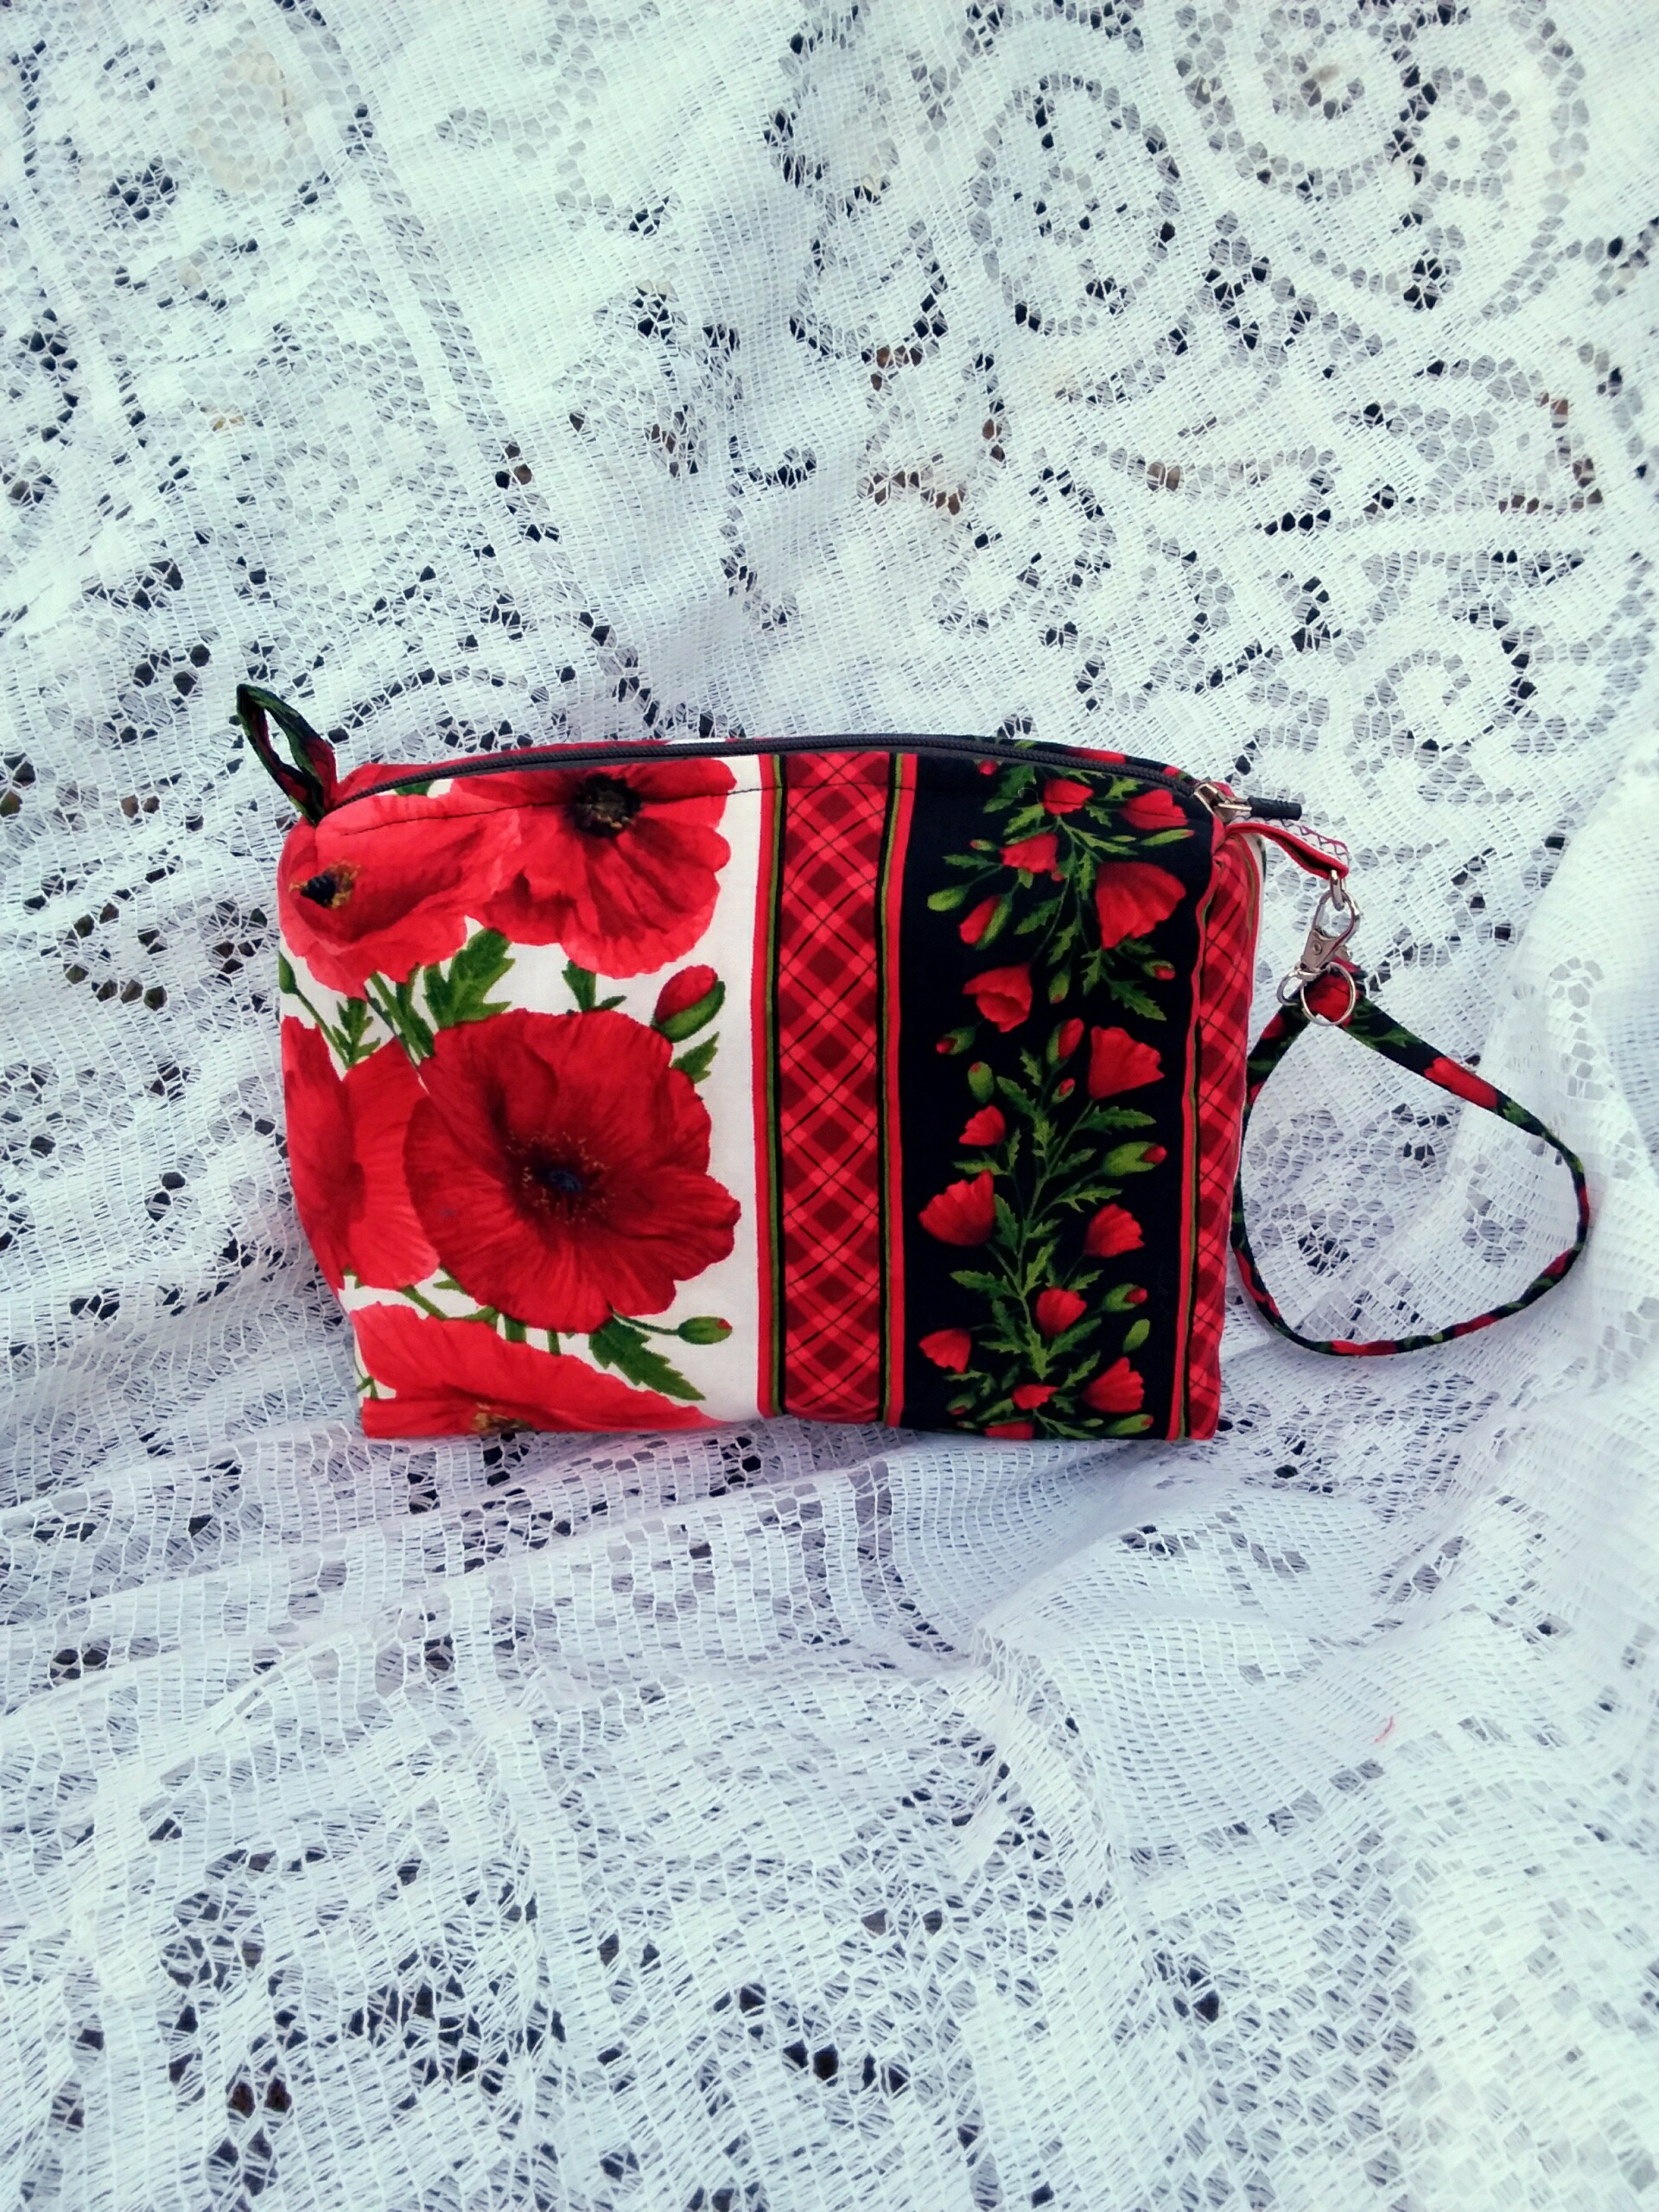 Bold poppy fabric, handcrafted into a quilted wristlet bag rests upon a vintage lace background.